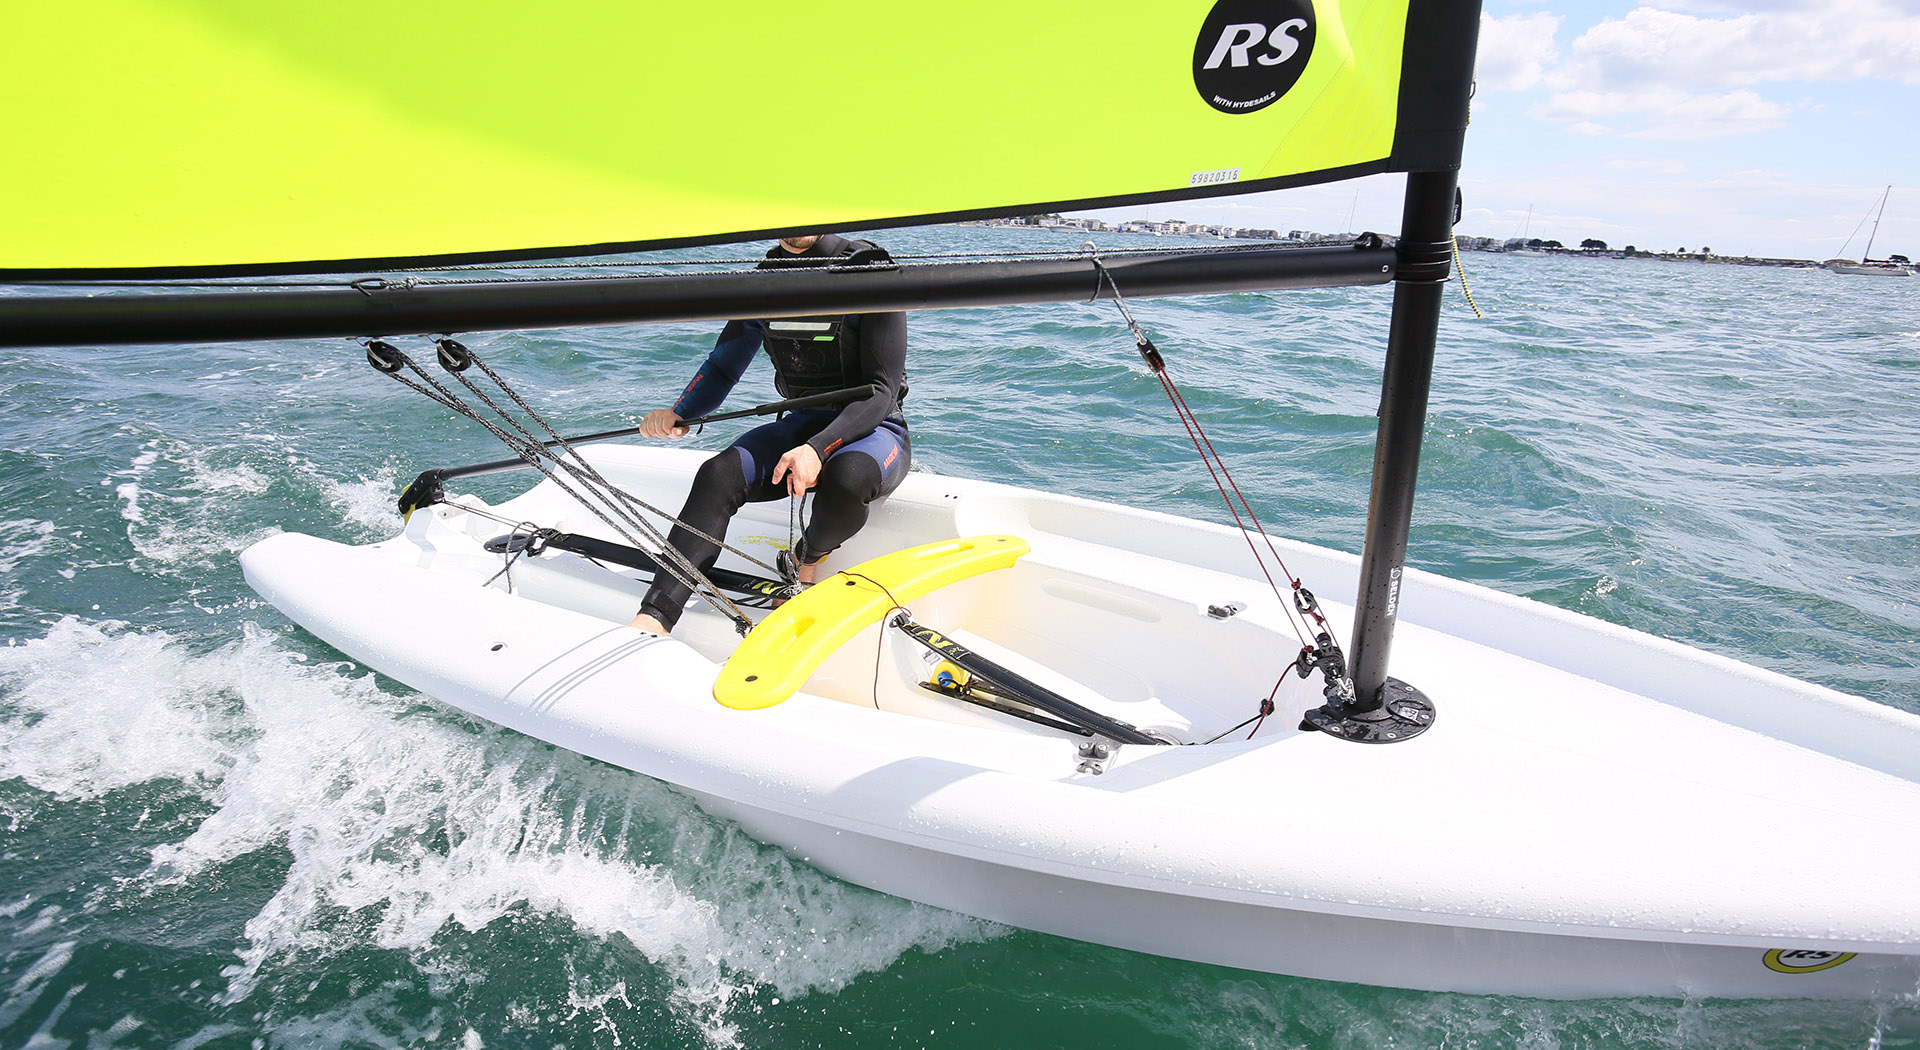 rs zest - new generation compact sailboat with leading